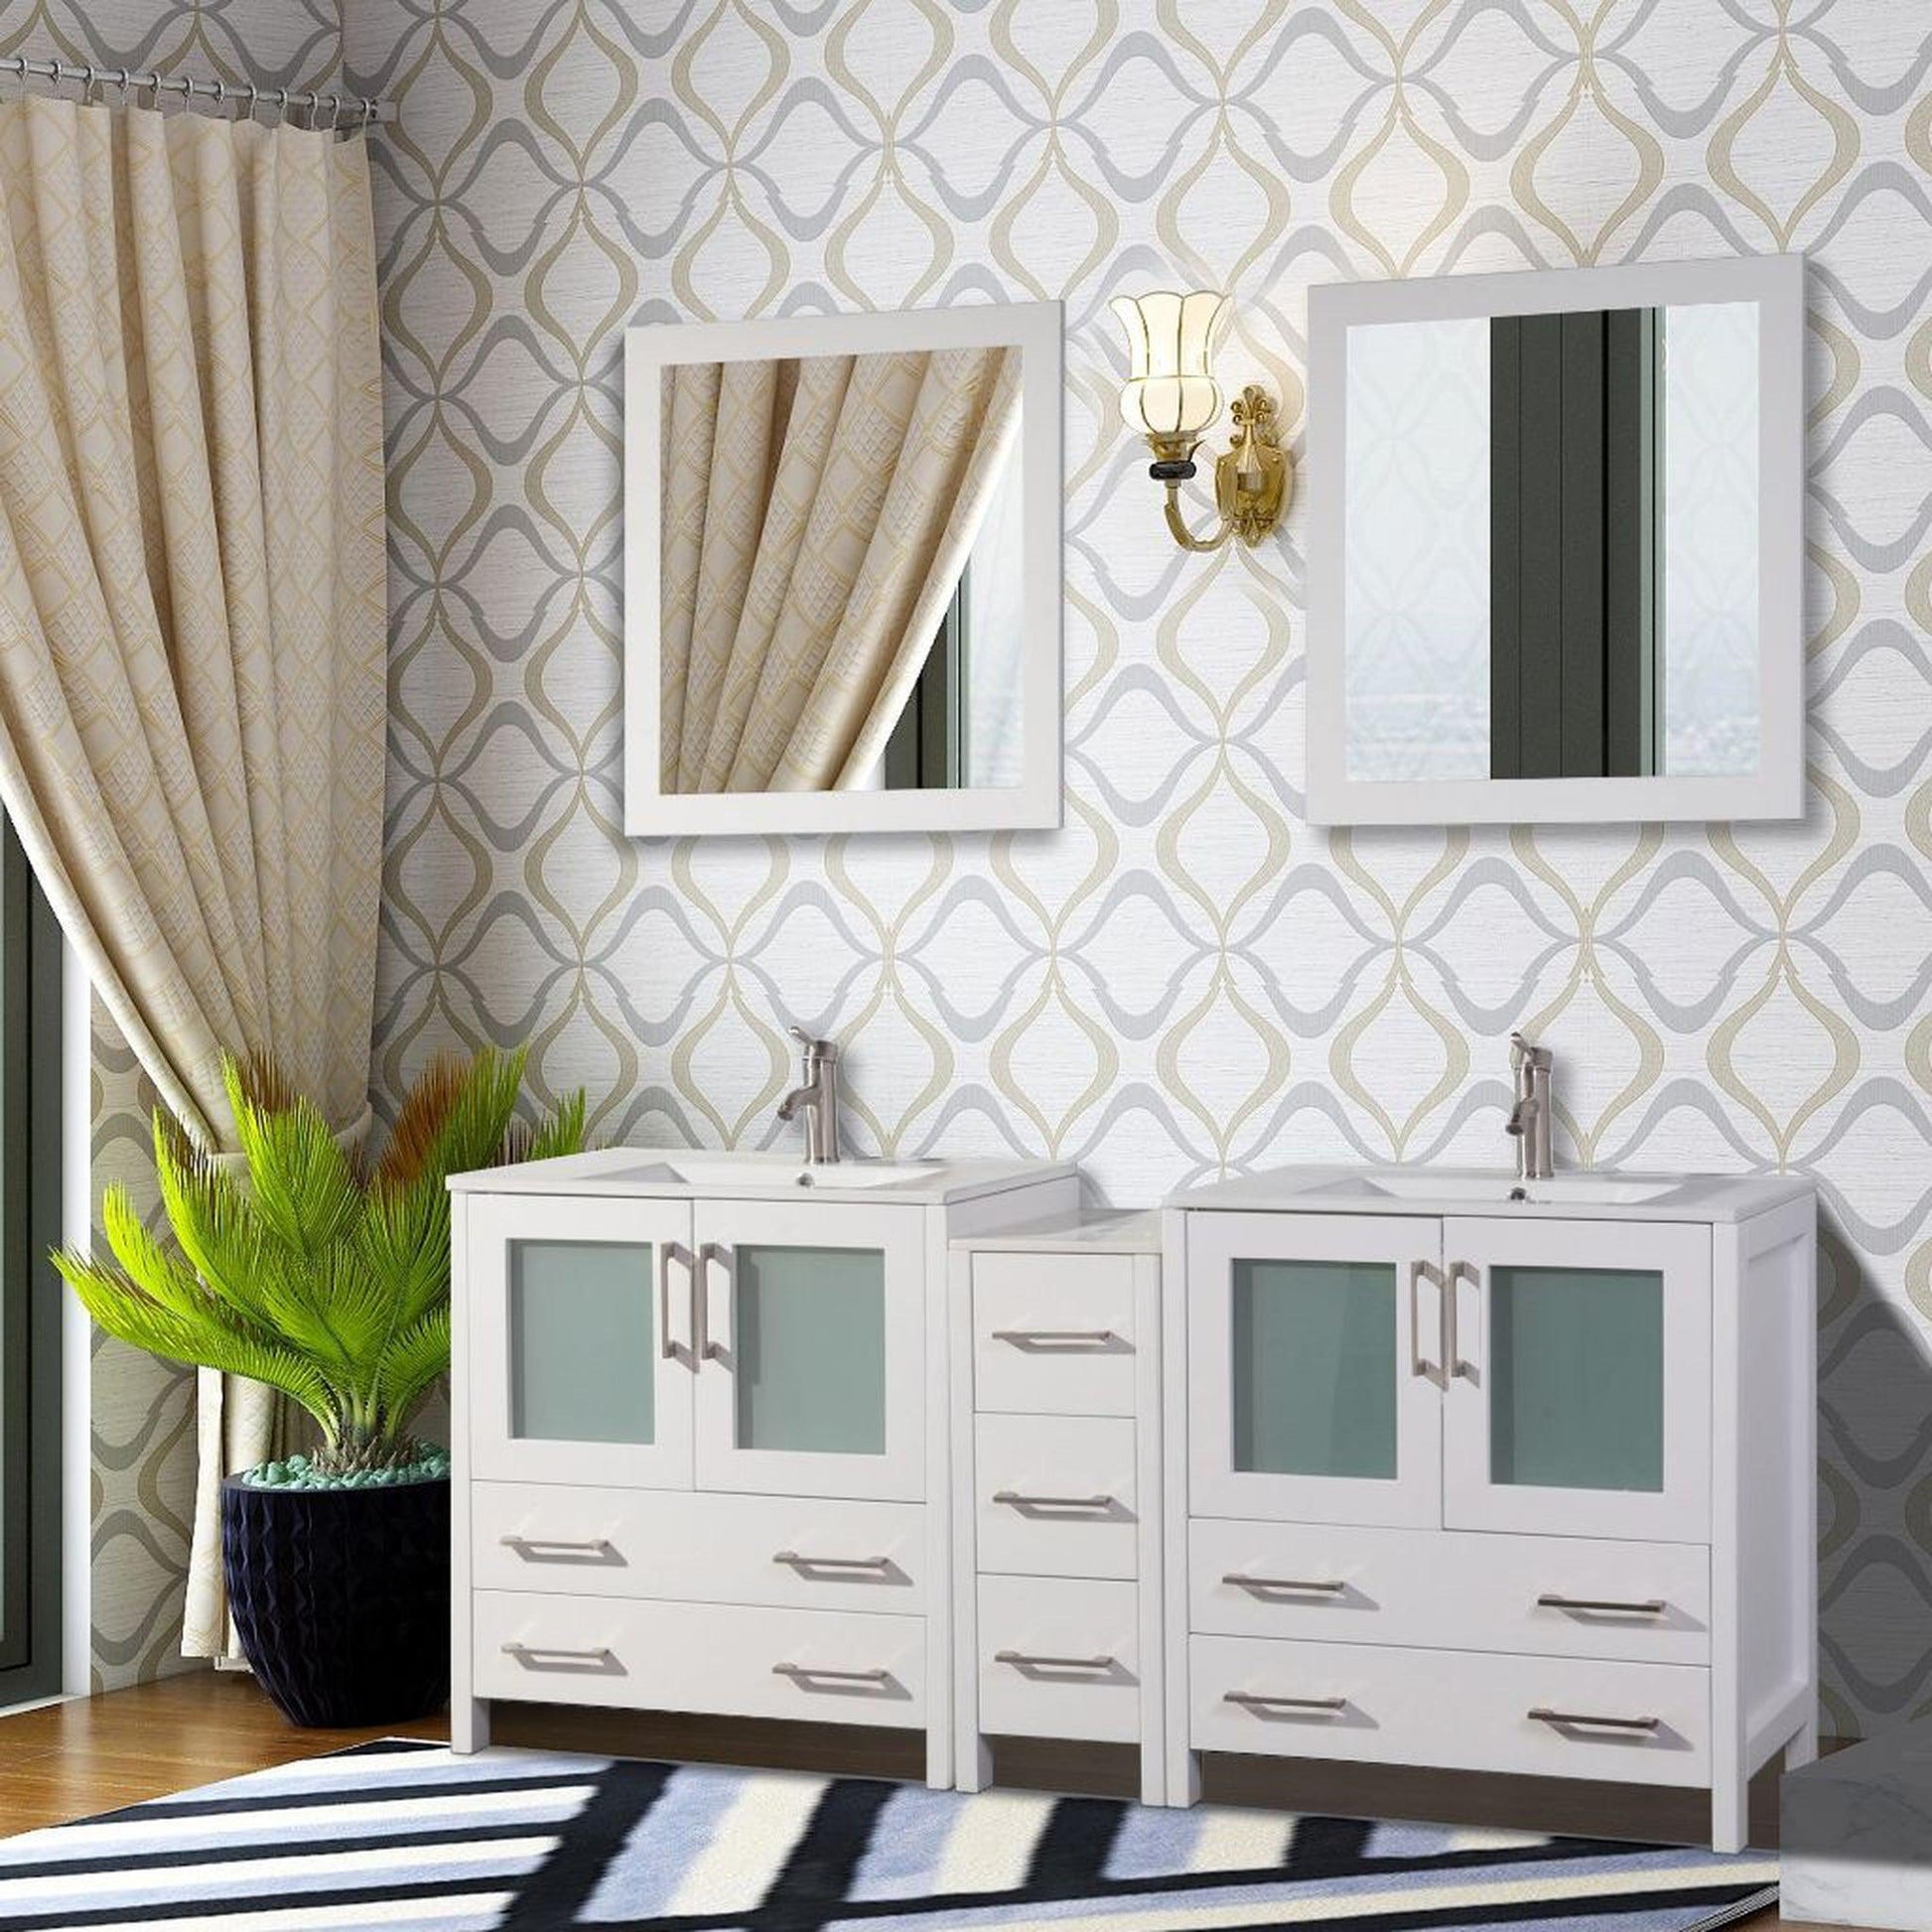 Vanity Art VA30 72" Double White Freestanding Modern Bathroom Vanity Set With Integrated Ceramic Sink, Compact 2 Shelves, 7 Dovetail Drawers Cabinet and 2 Mirrors